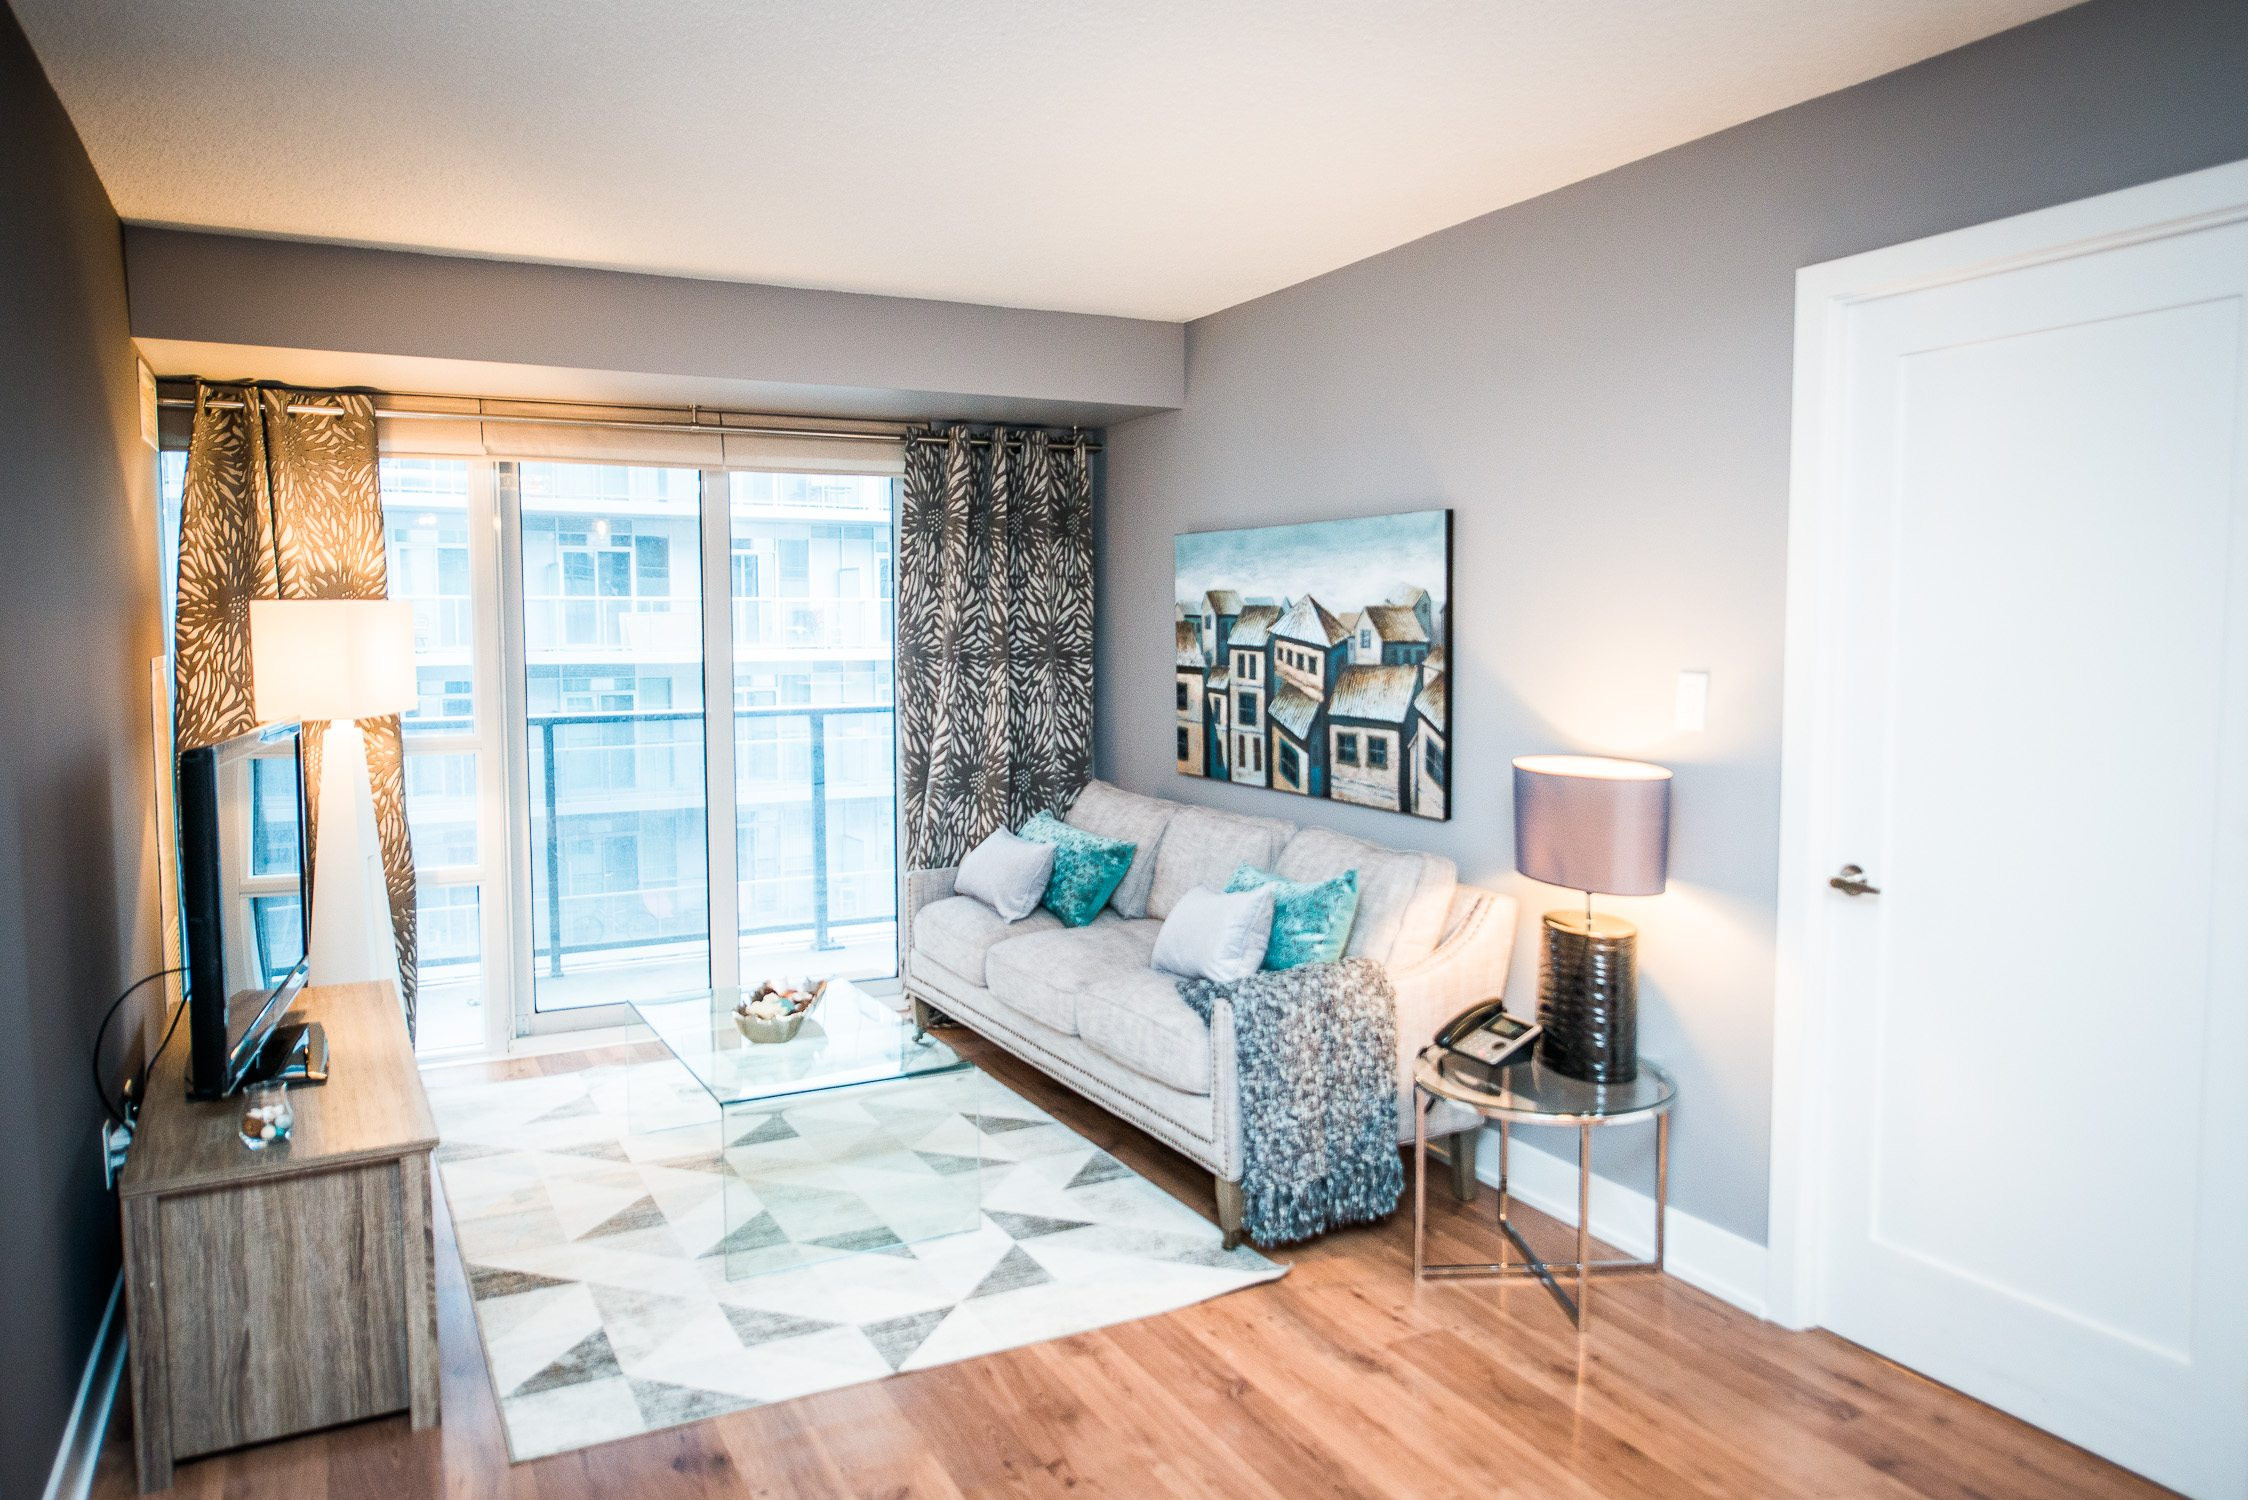 29 Elegant Hardwood Flooring toronto Ontario 2024 free download hardwood flooring toronto ontario of signature four 3 bedroom furnished condo for rent intended for toronto furnished apartment king west blue pillow on couch